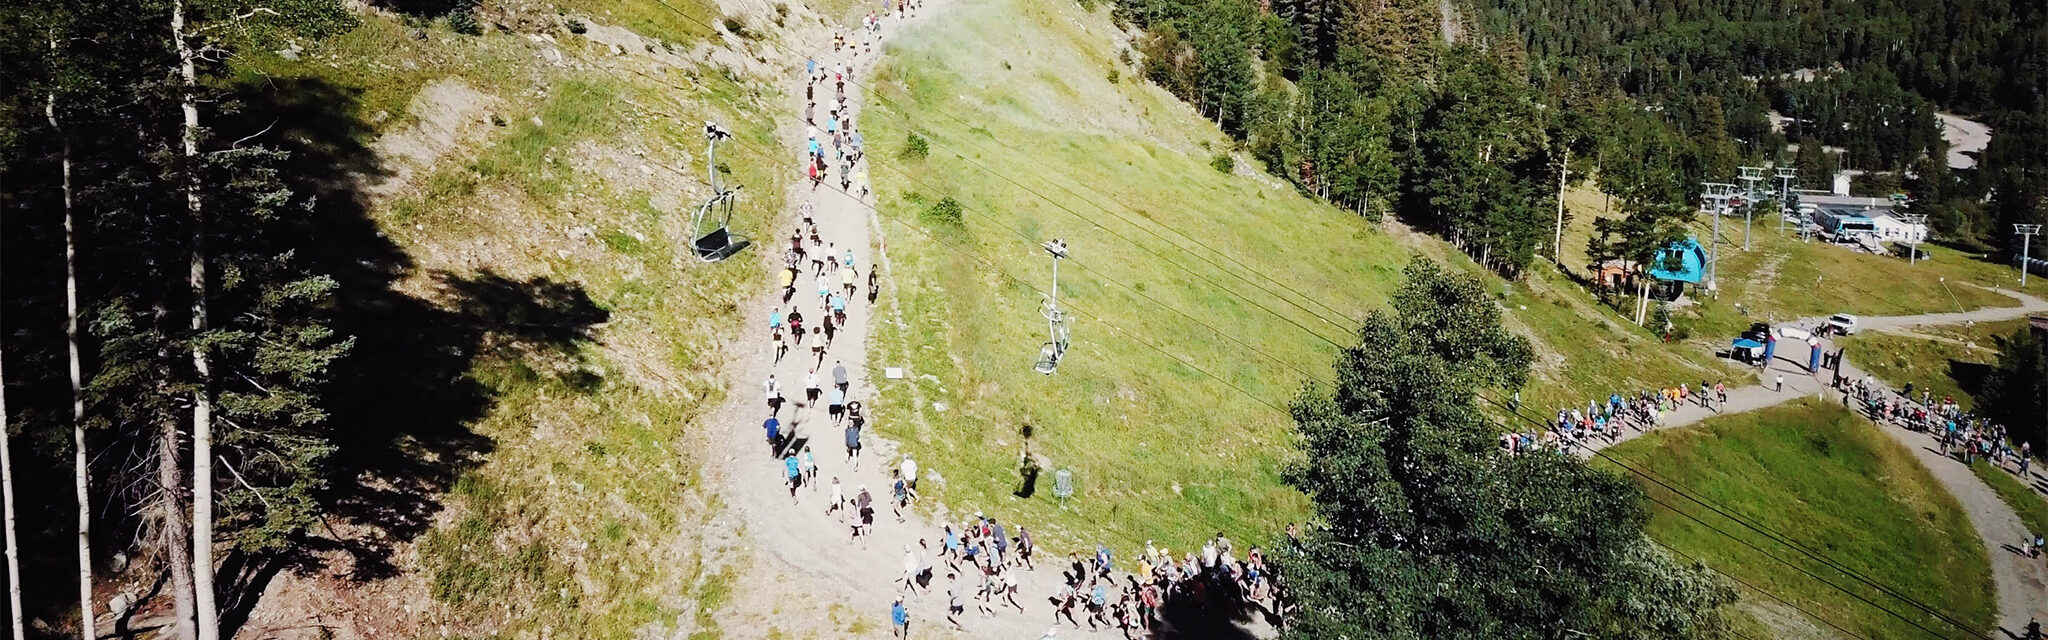 An overhead view of a trail run starting line, with runners climbing a steep trail under a chairlift in summer.